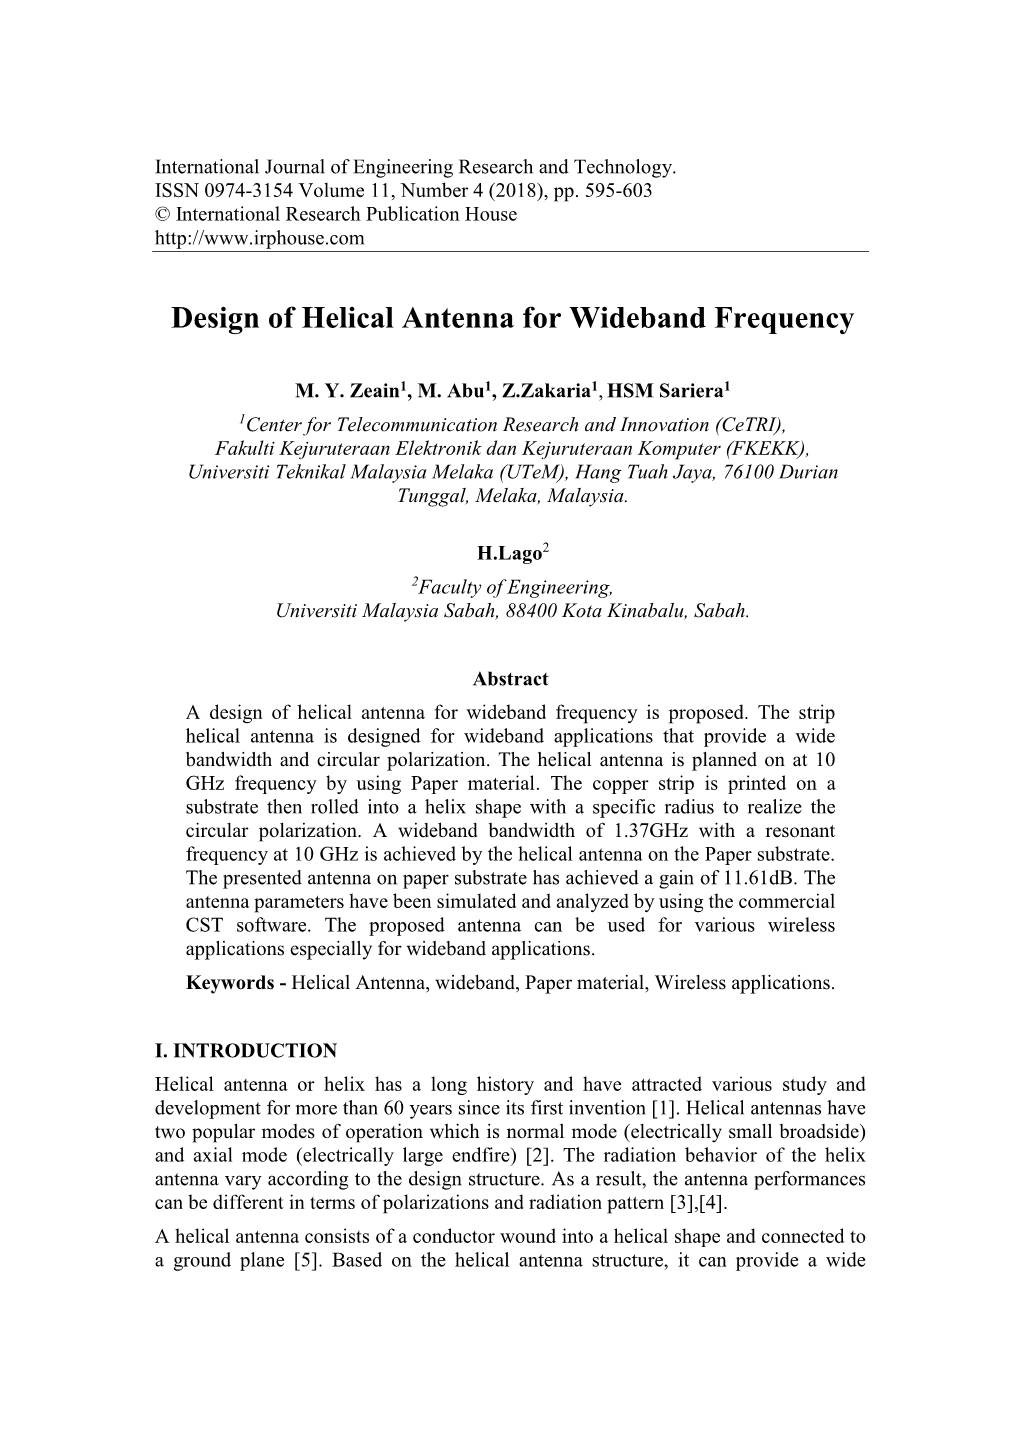 Design of Helical Antenna for Wideband Frequency